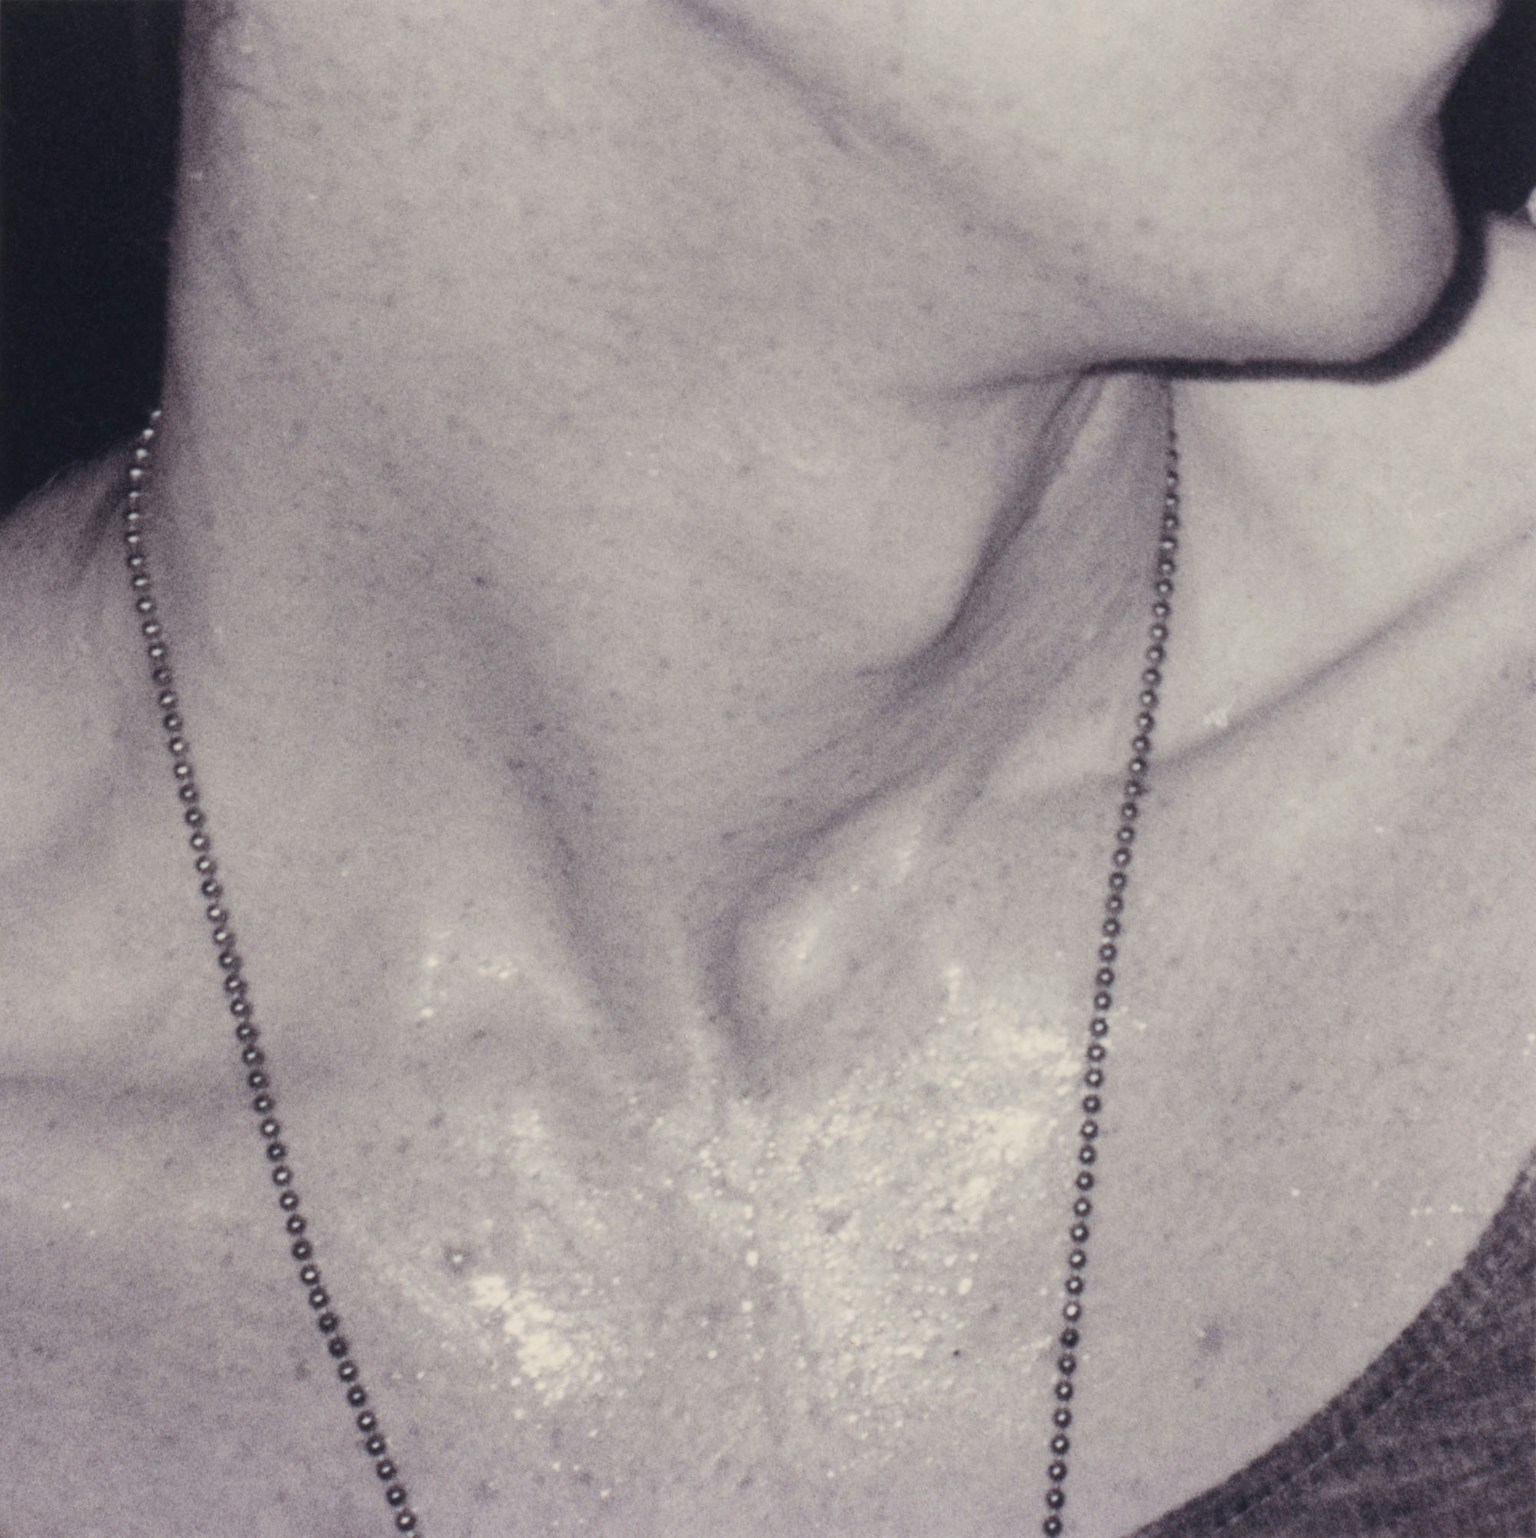 The Photographic Wolfgang Tillmans 1992 067 Chemistry square neck chest E10000 XL spotted cropped A4